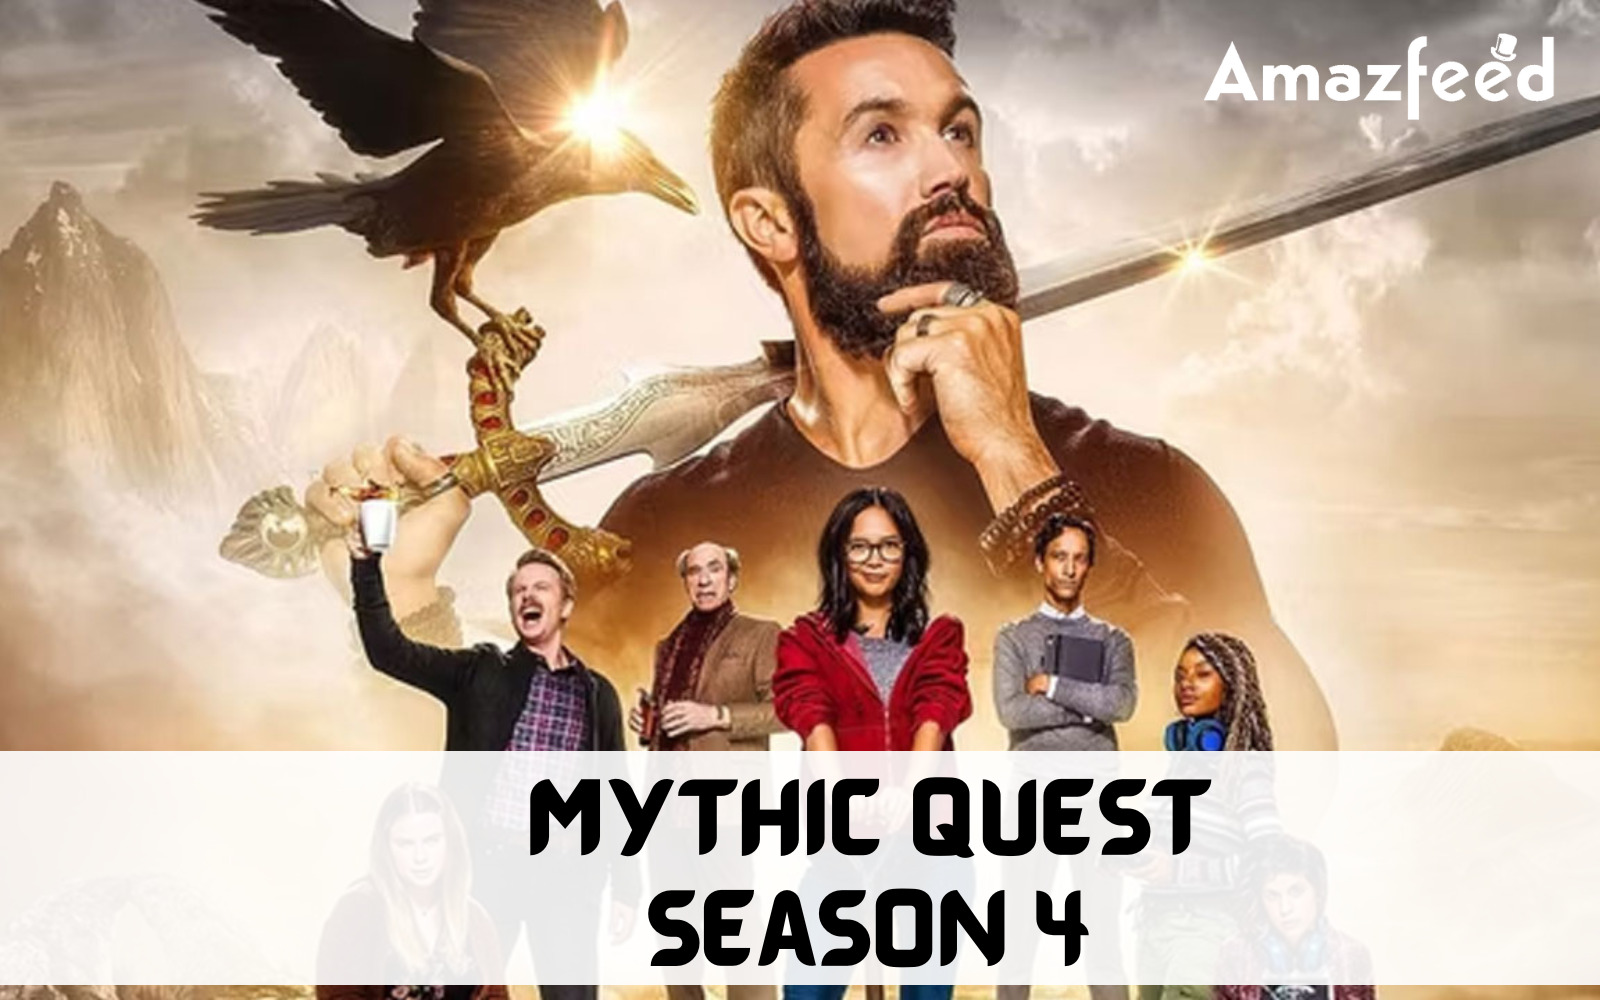 How many Episodes of Mythic Quest Season 4 will be there